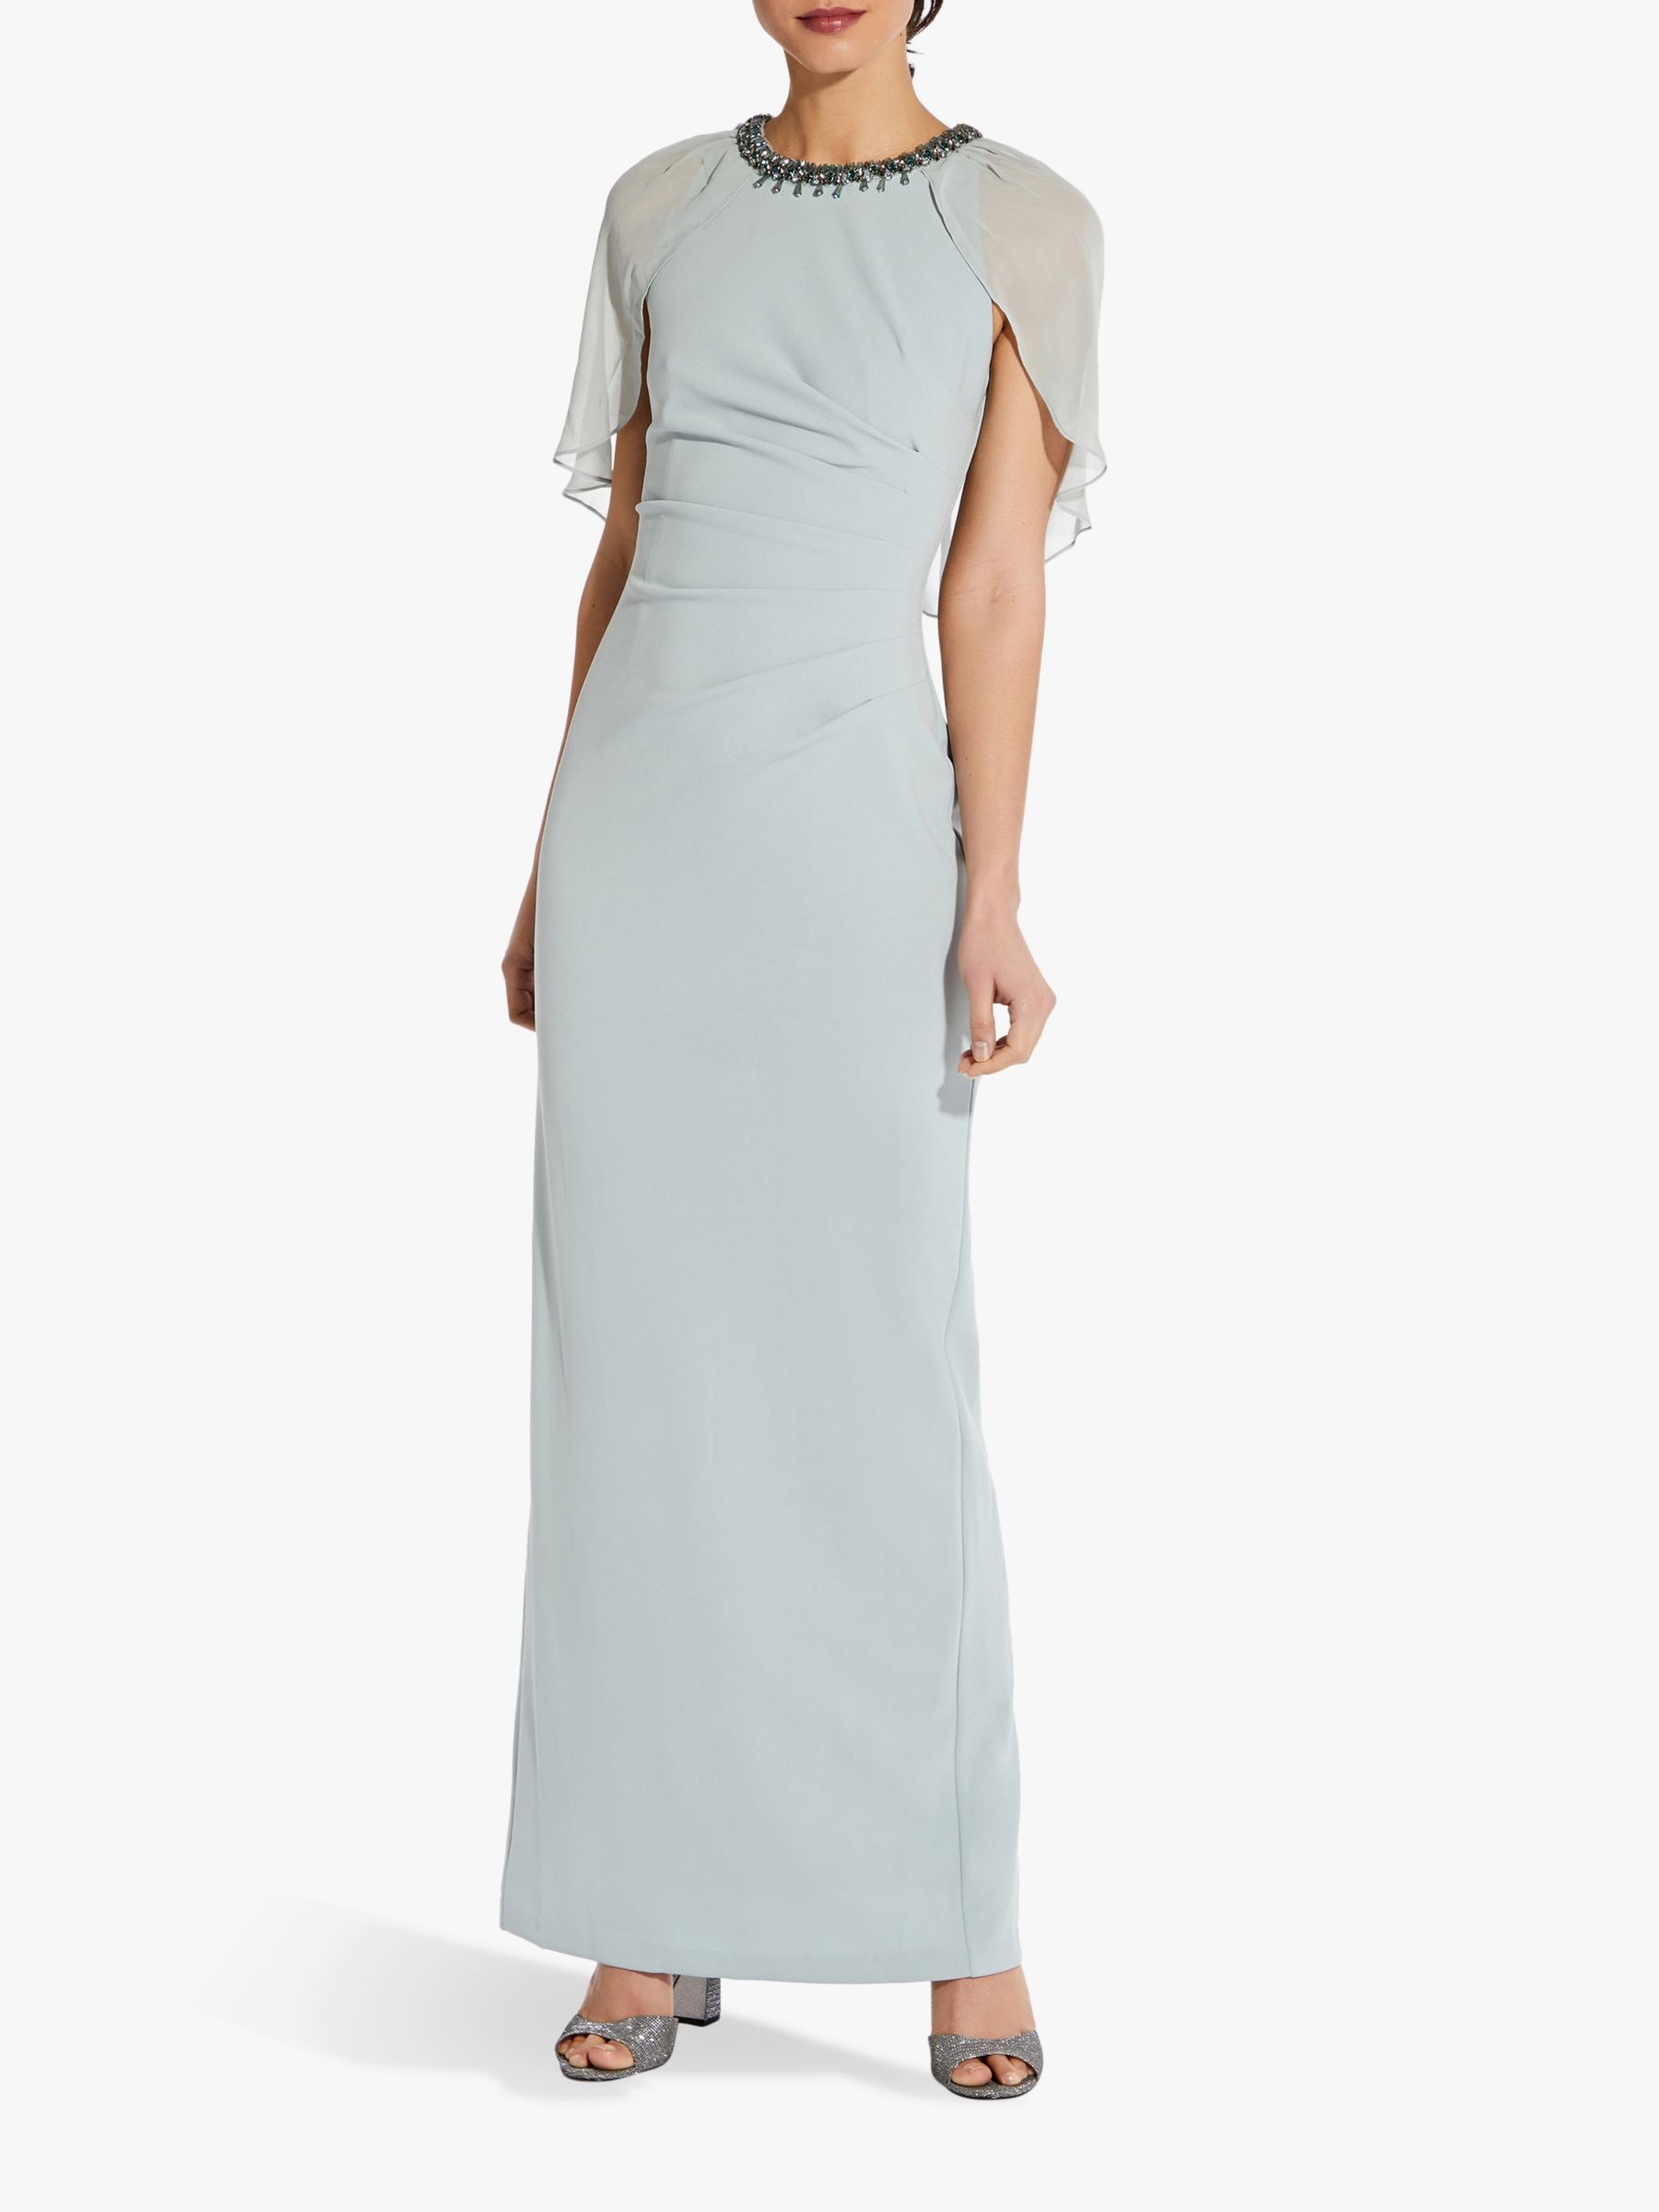 Adrianna Papell Chiffon Capelet Crepe Gown, Frosted Sage at John Lewis ...